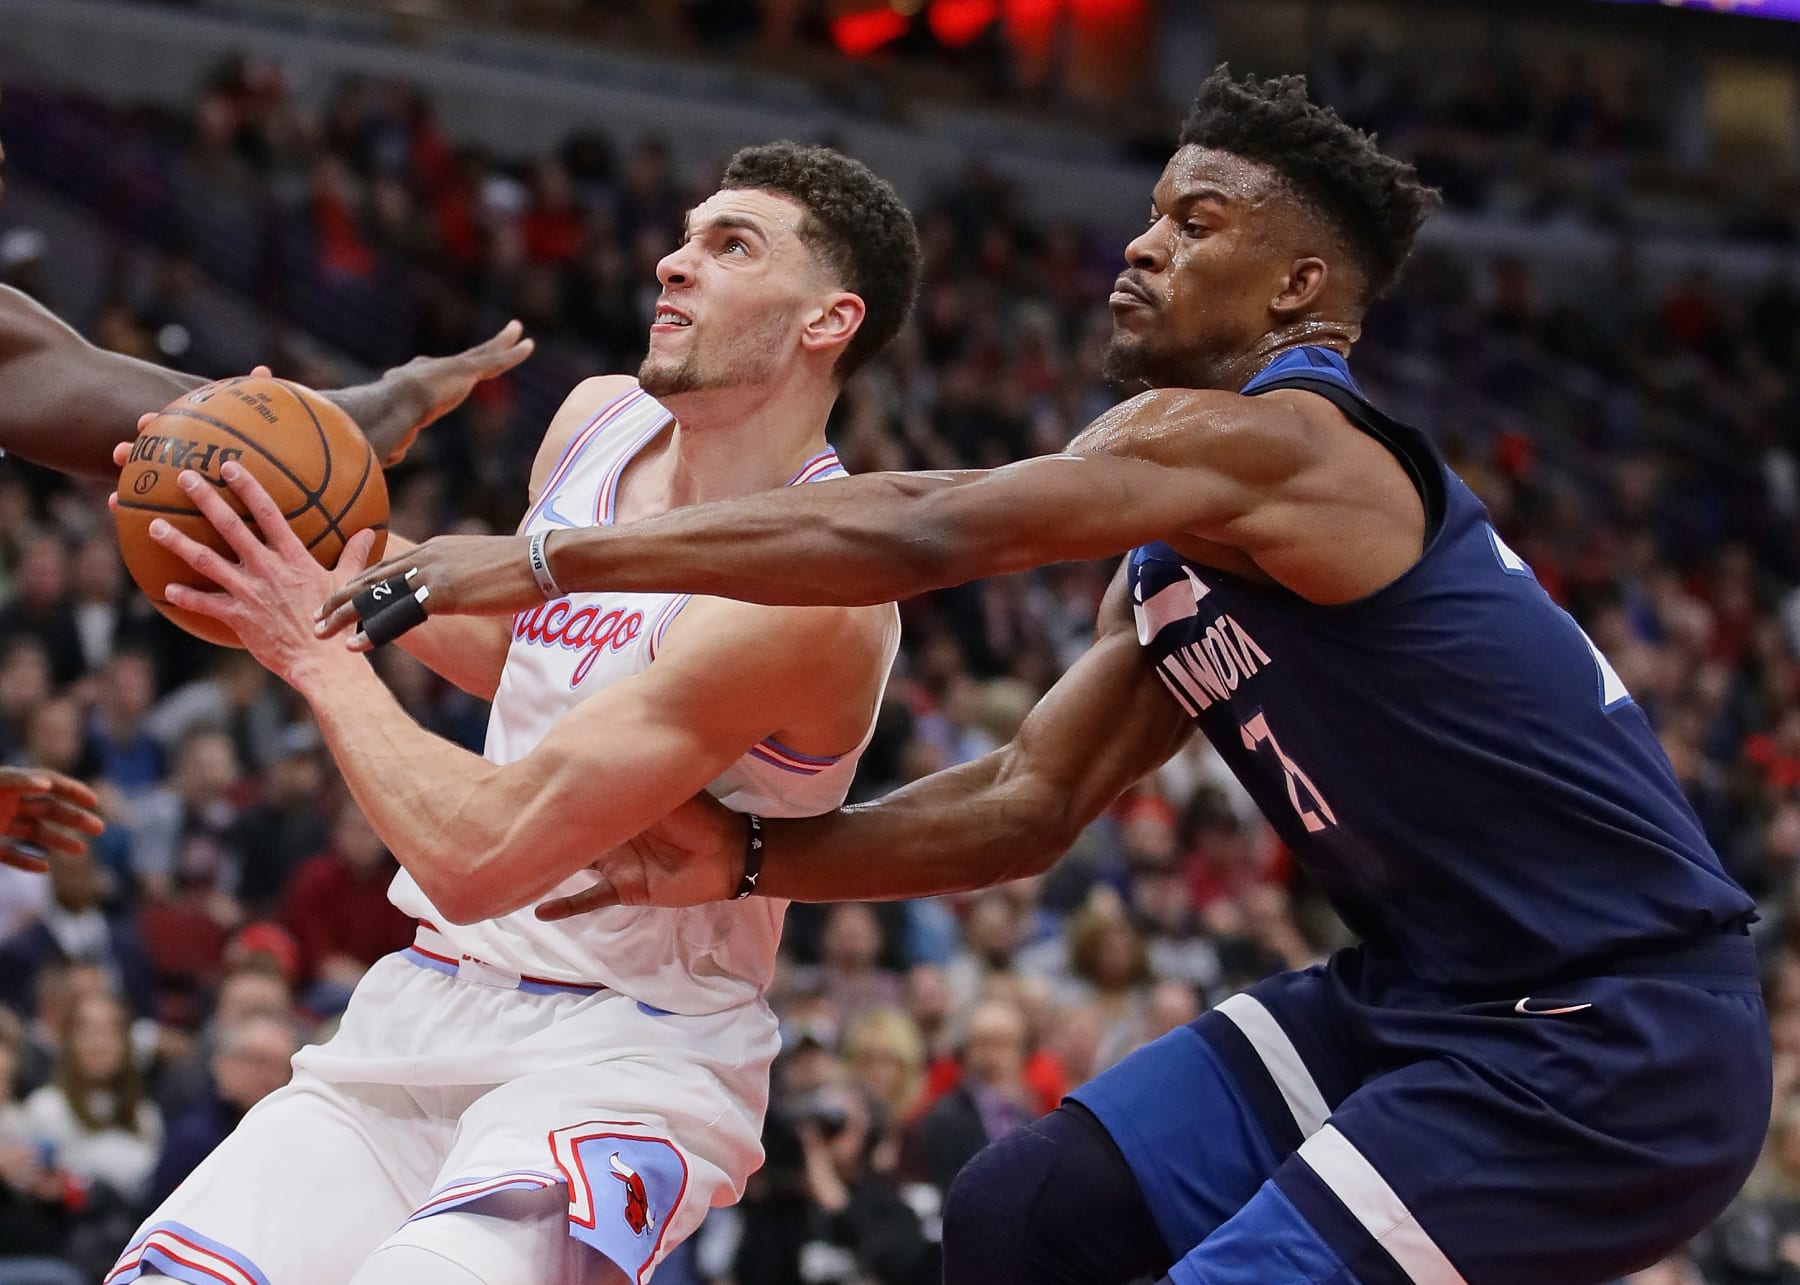 Clippers fall as Love sinks buzzer-beater – Orange County Register